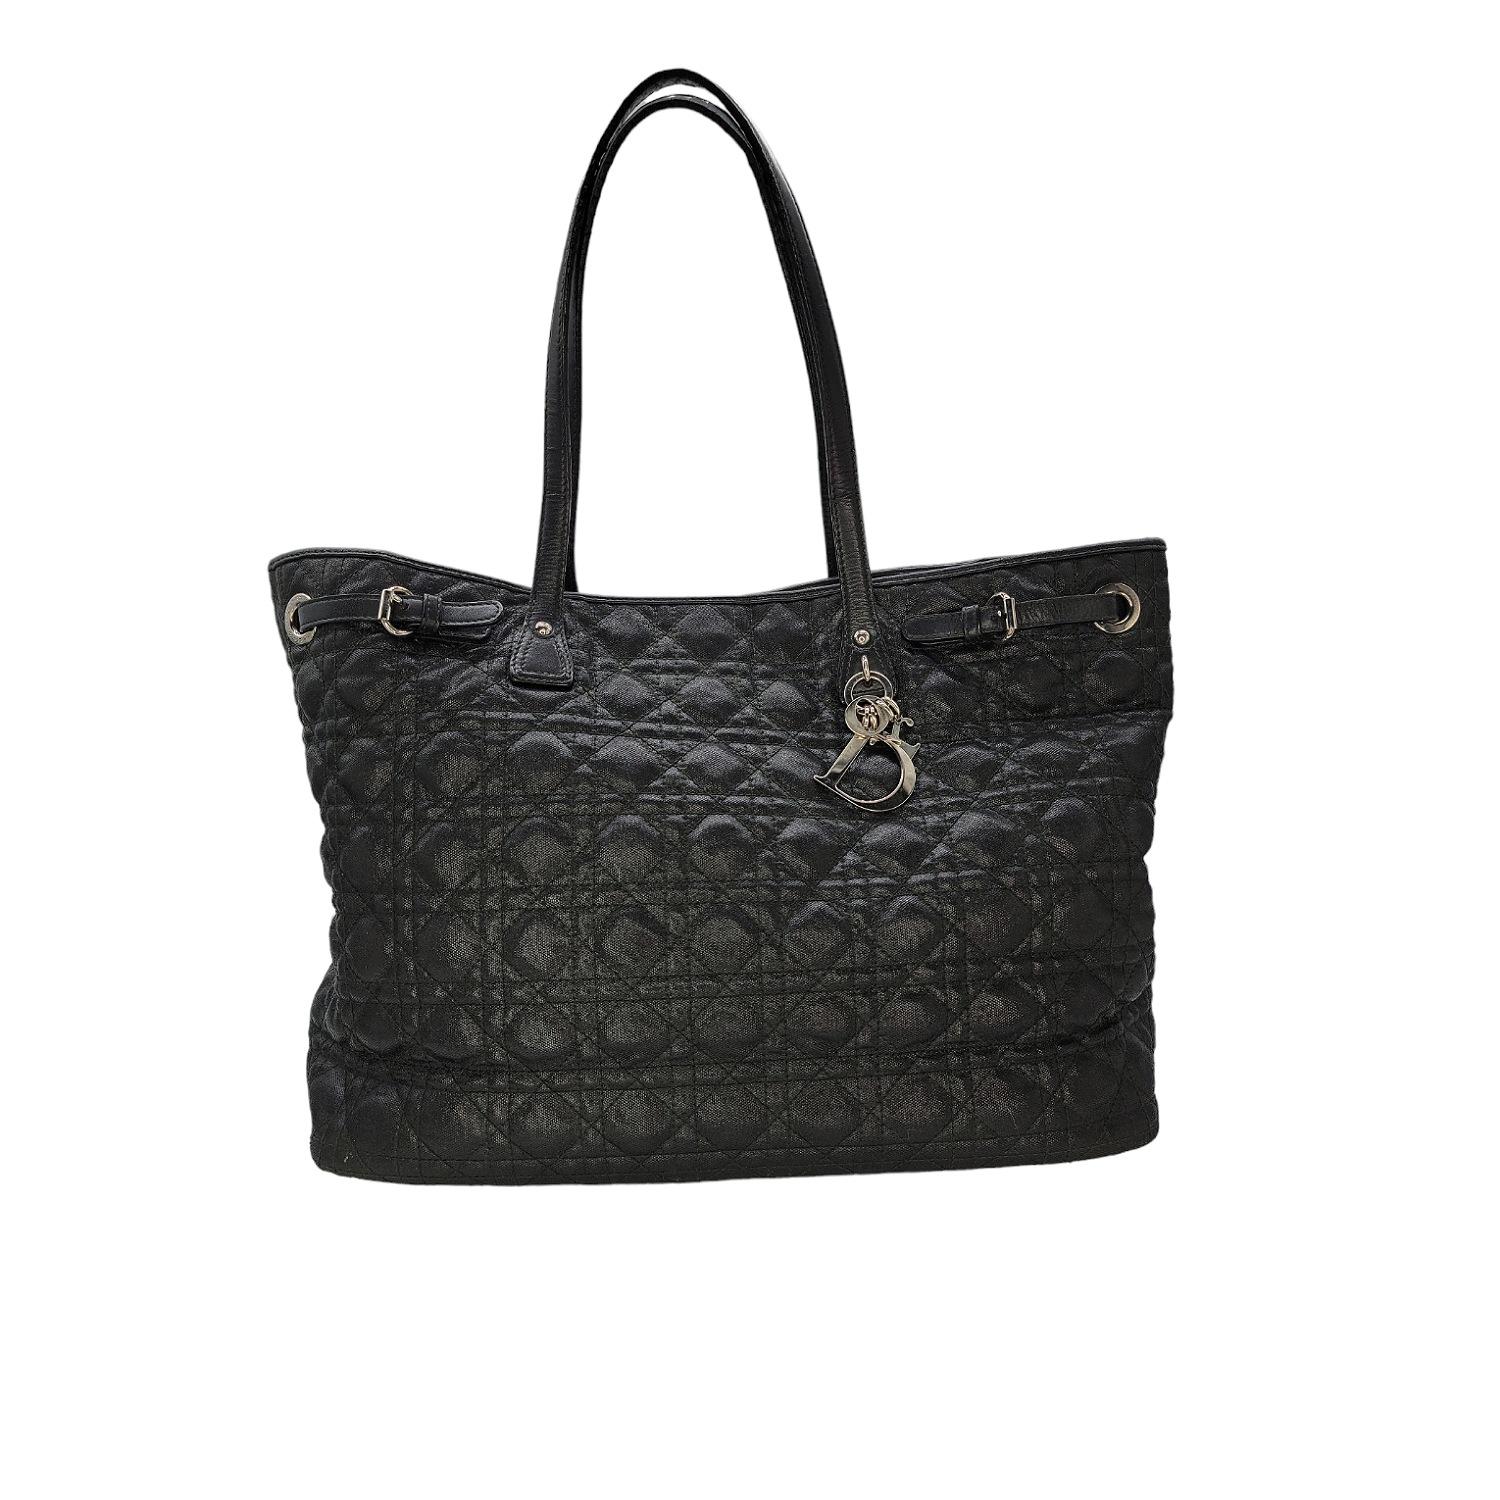 This Christian Dior Cannage Panarea Medium Tote was made in Italy and it is finely crafted of black coated canvas with Cannage pattern embroidery. It features a magnetic snap closure that opens up to a very spacious black canvas interior with one